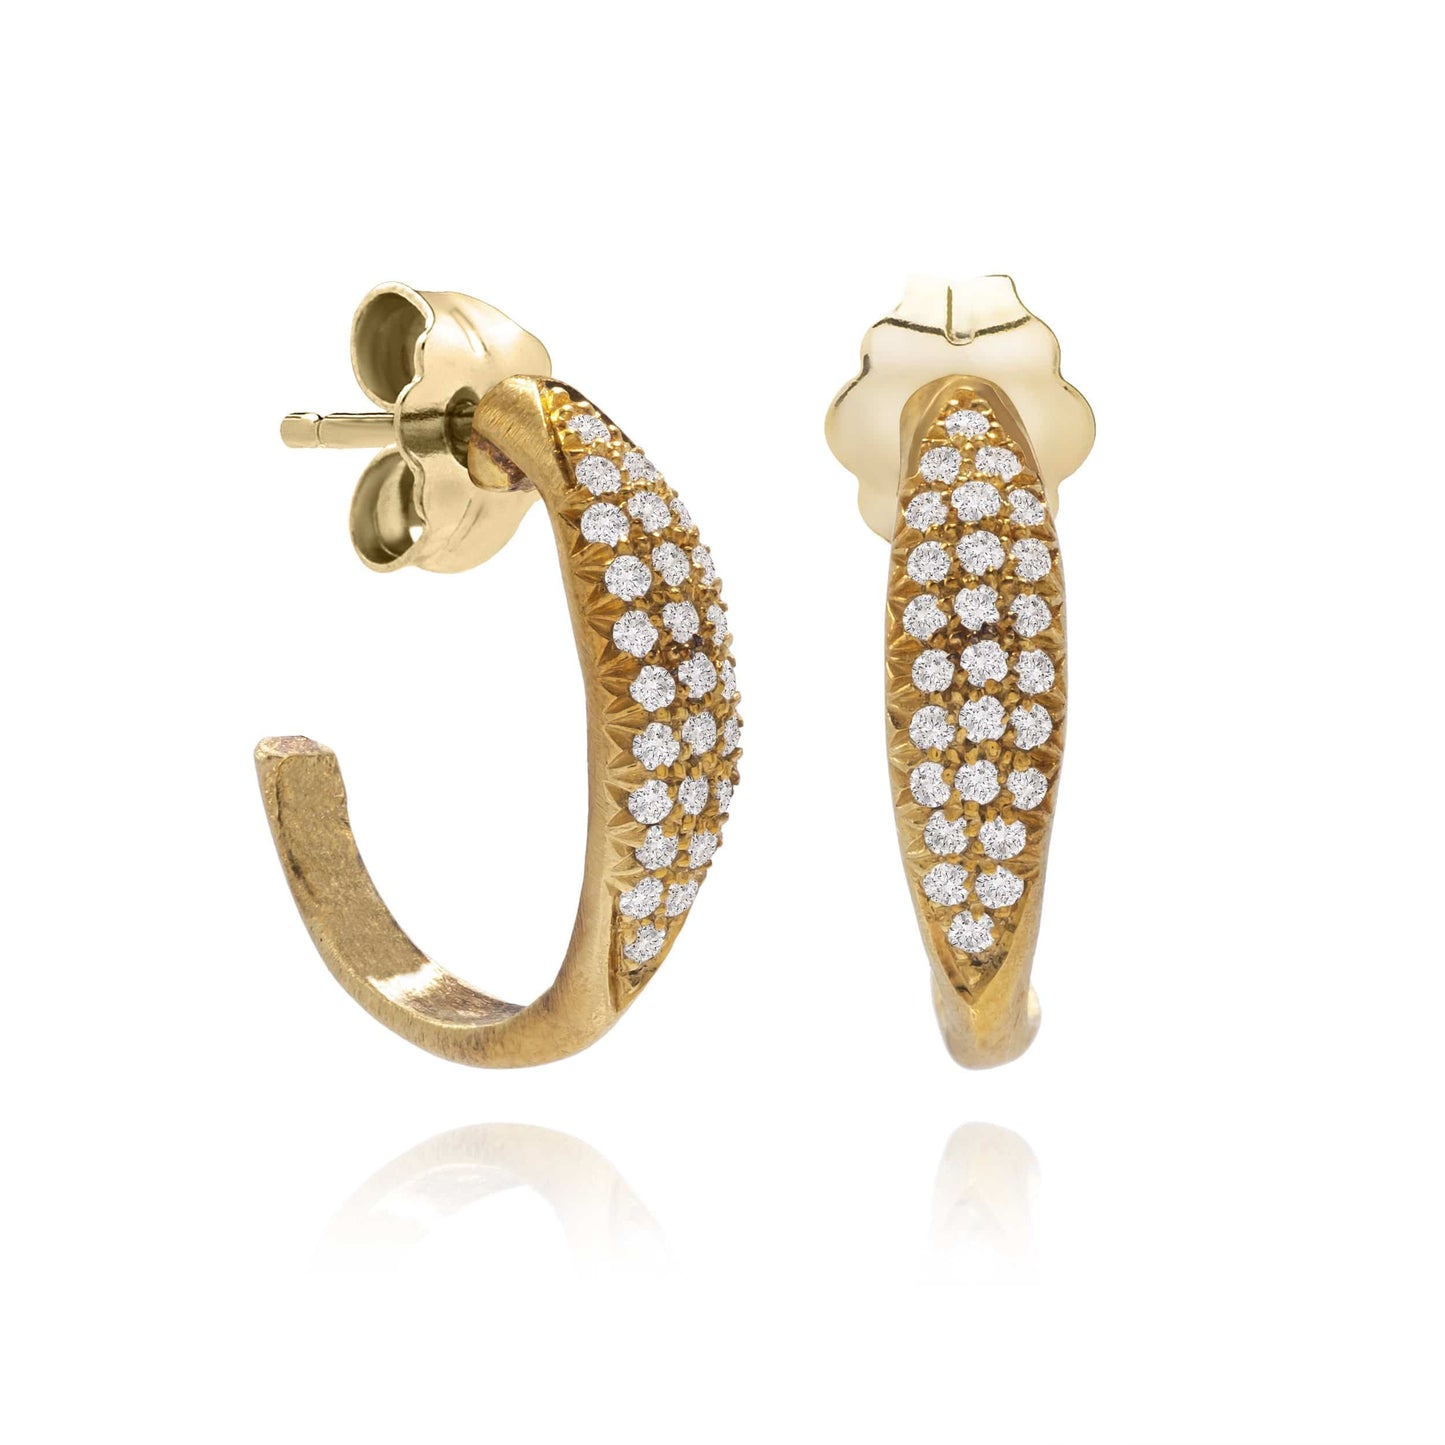 Dalia T Online Earrings Textured Gold Signature Collection 14KT Yellow Gold 12mm Pave Diamond Hoop Earrings